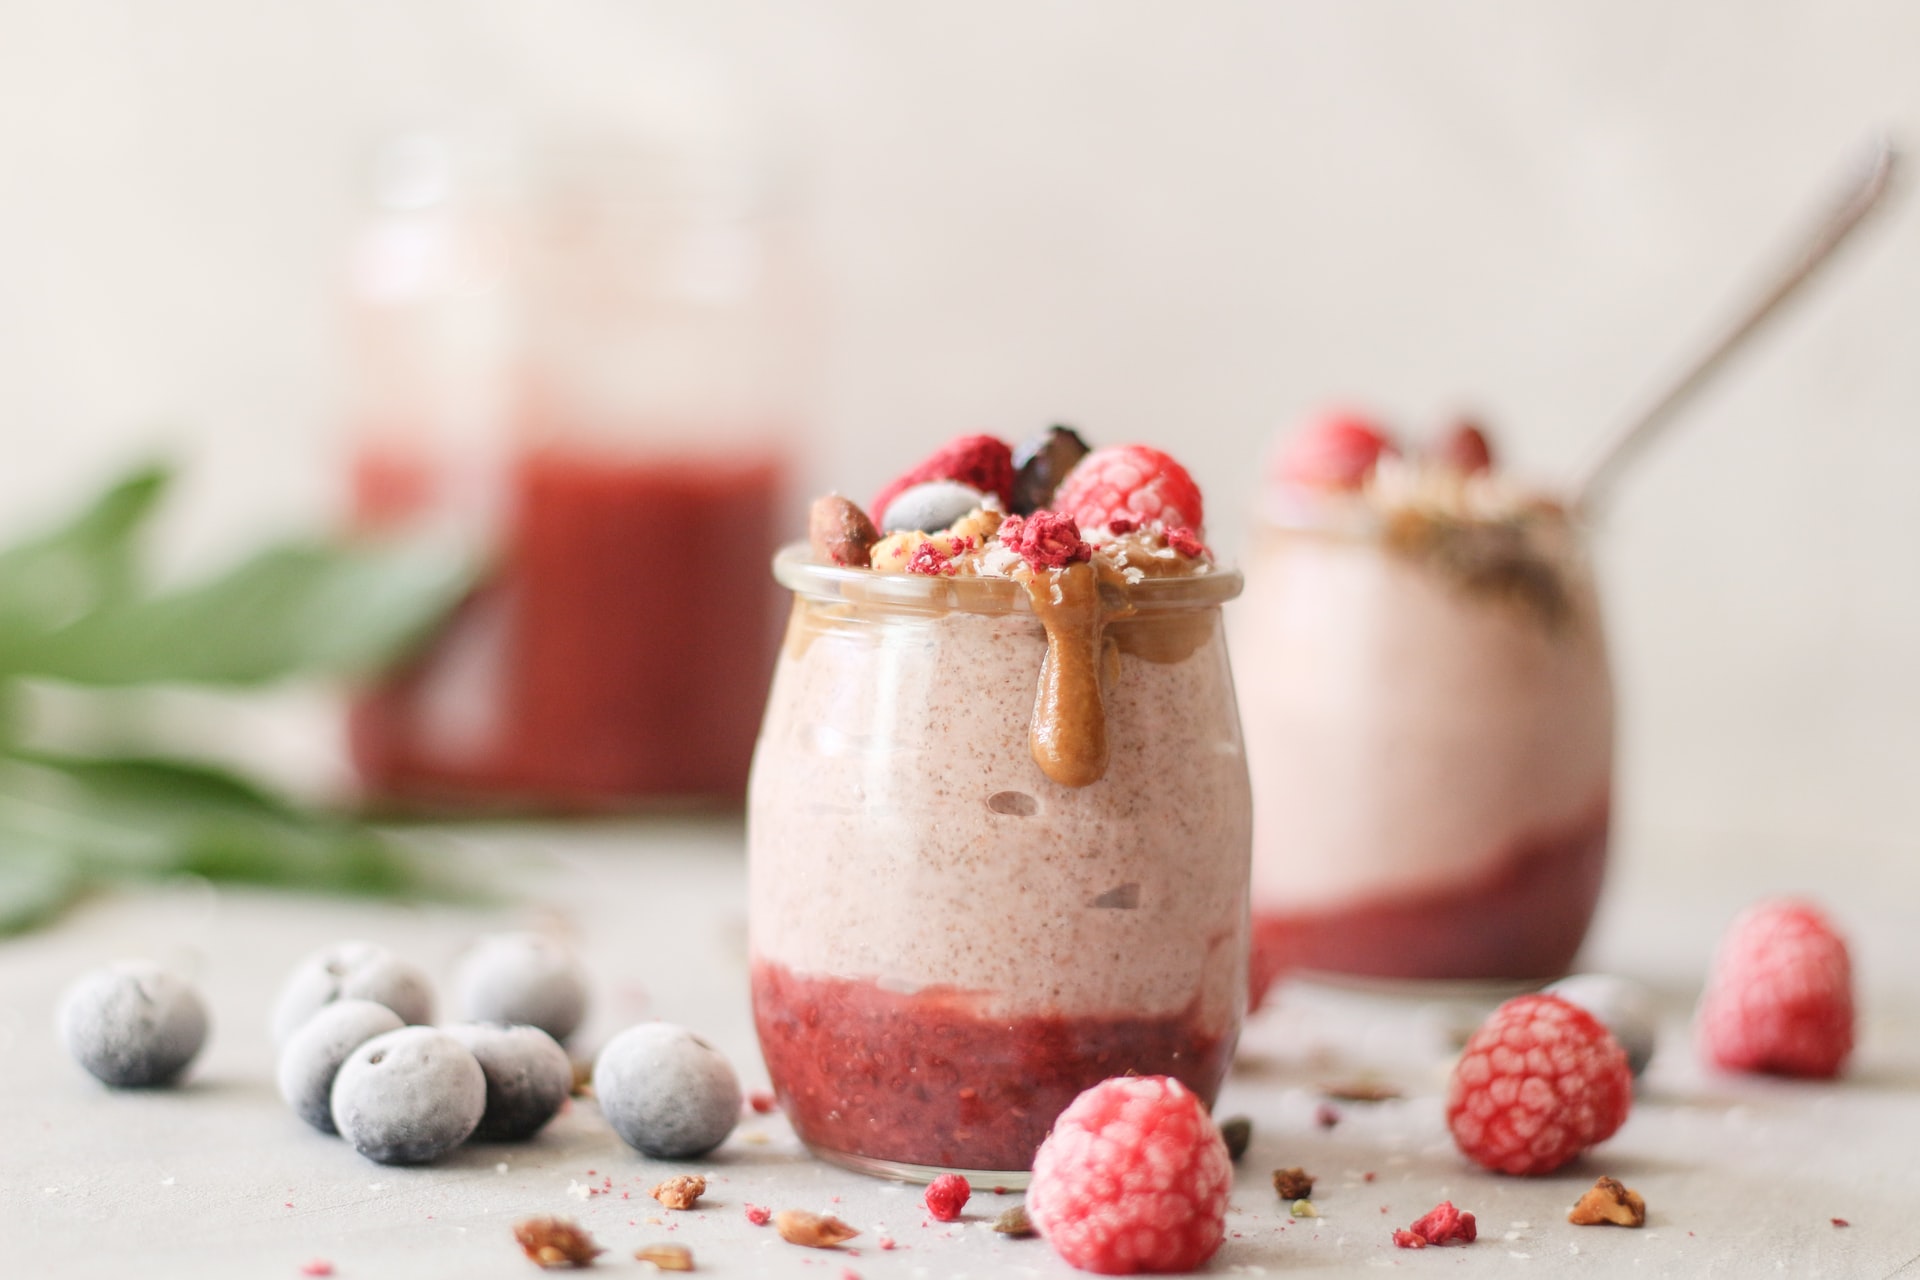 9 Morning Smoothie and Acaí Bowl Recipes to Fuel Your Morning Grind